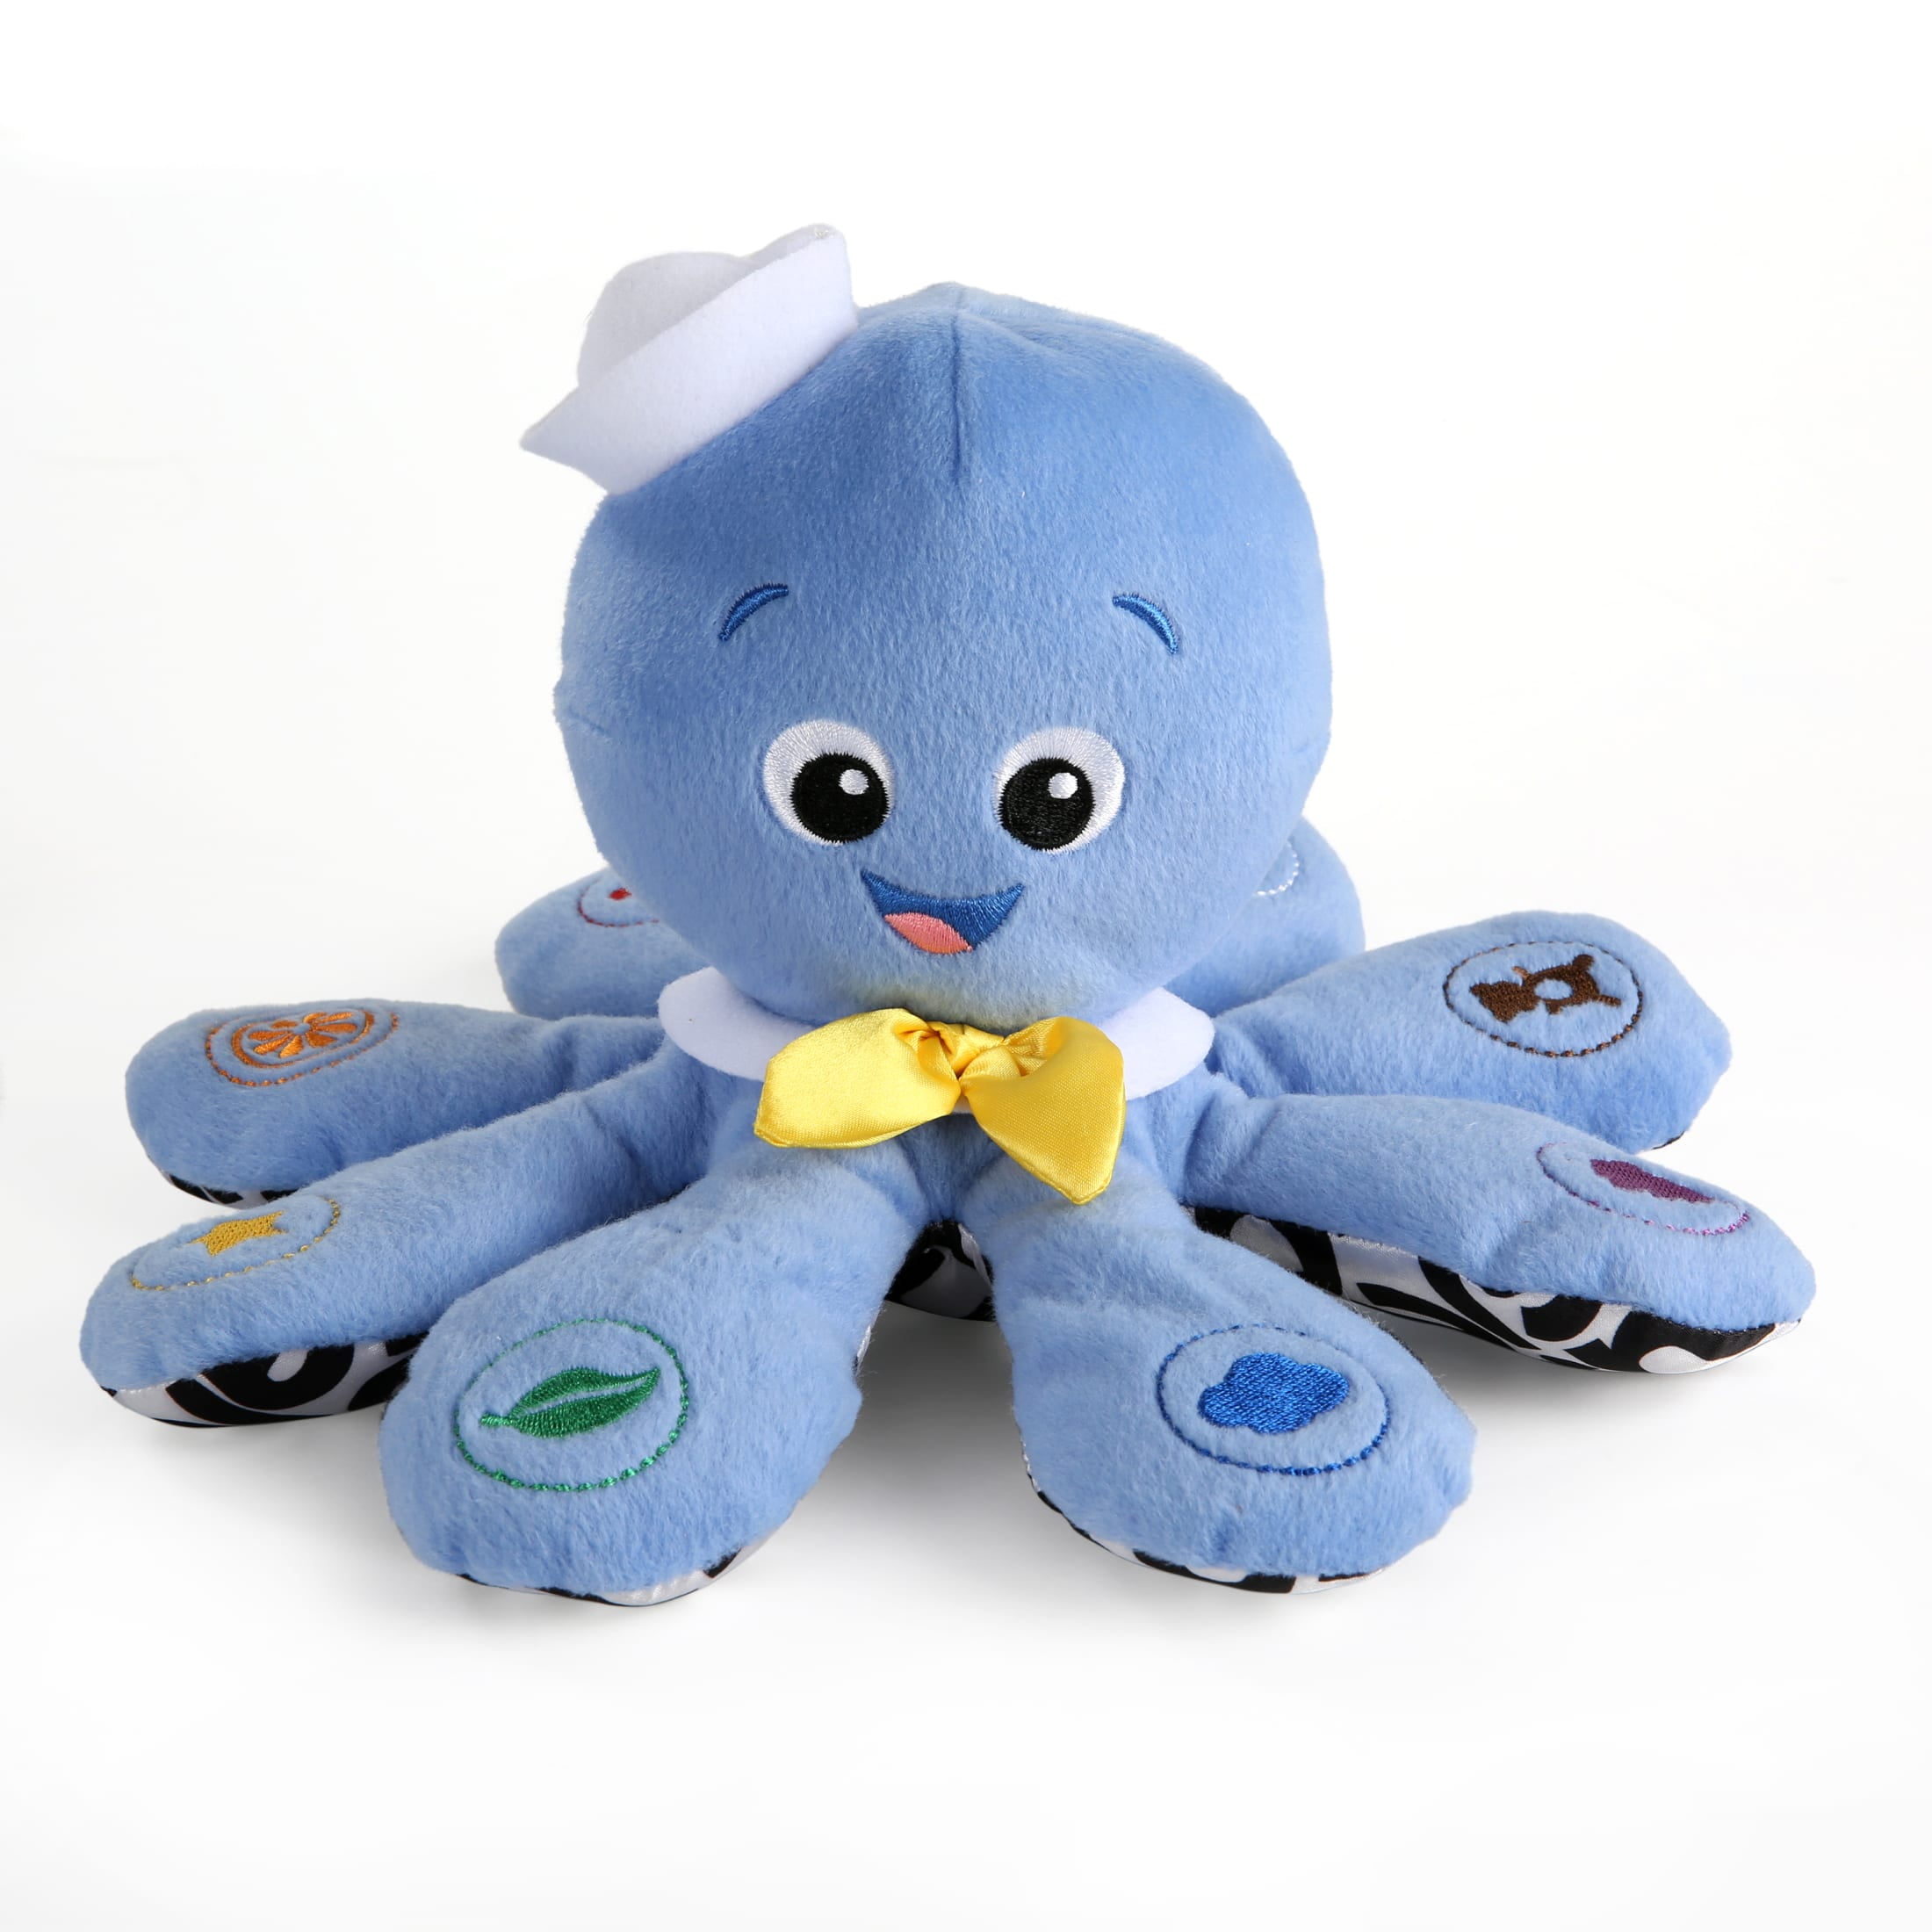 Baby Einstein Octoplush Musical Plush Learning Baby Toy for